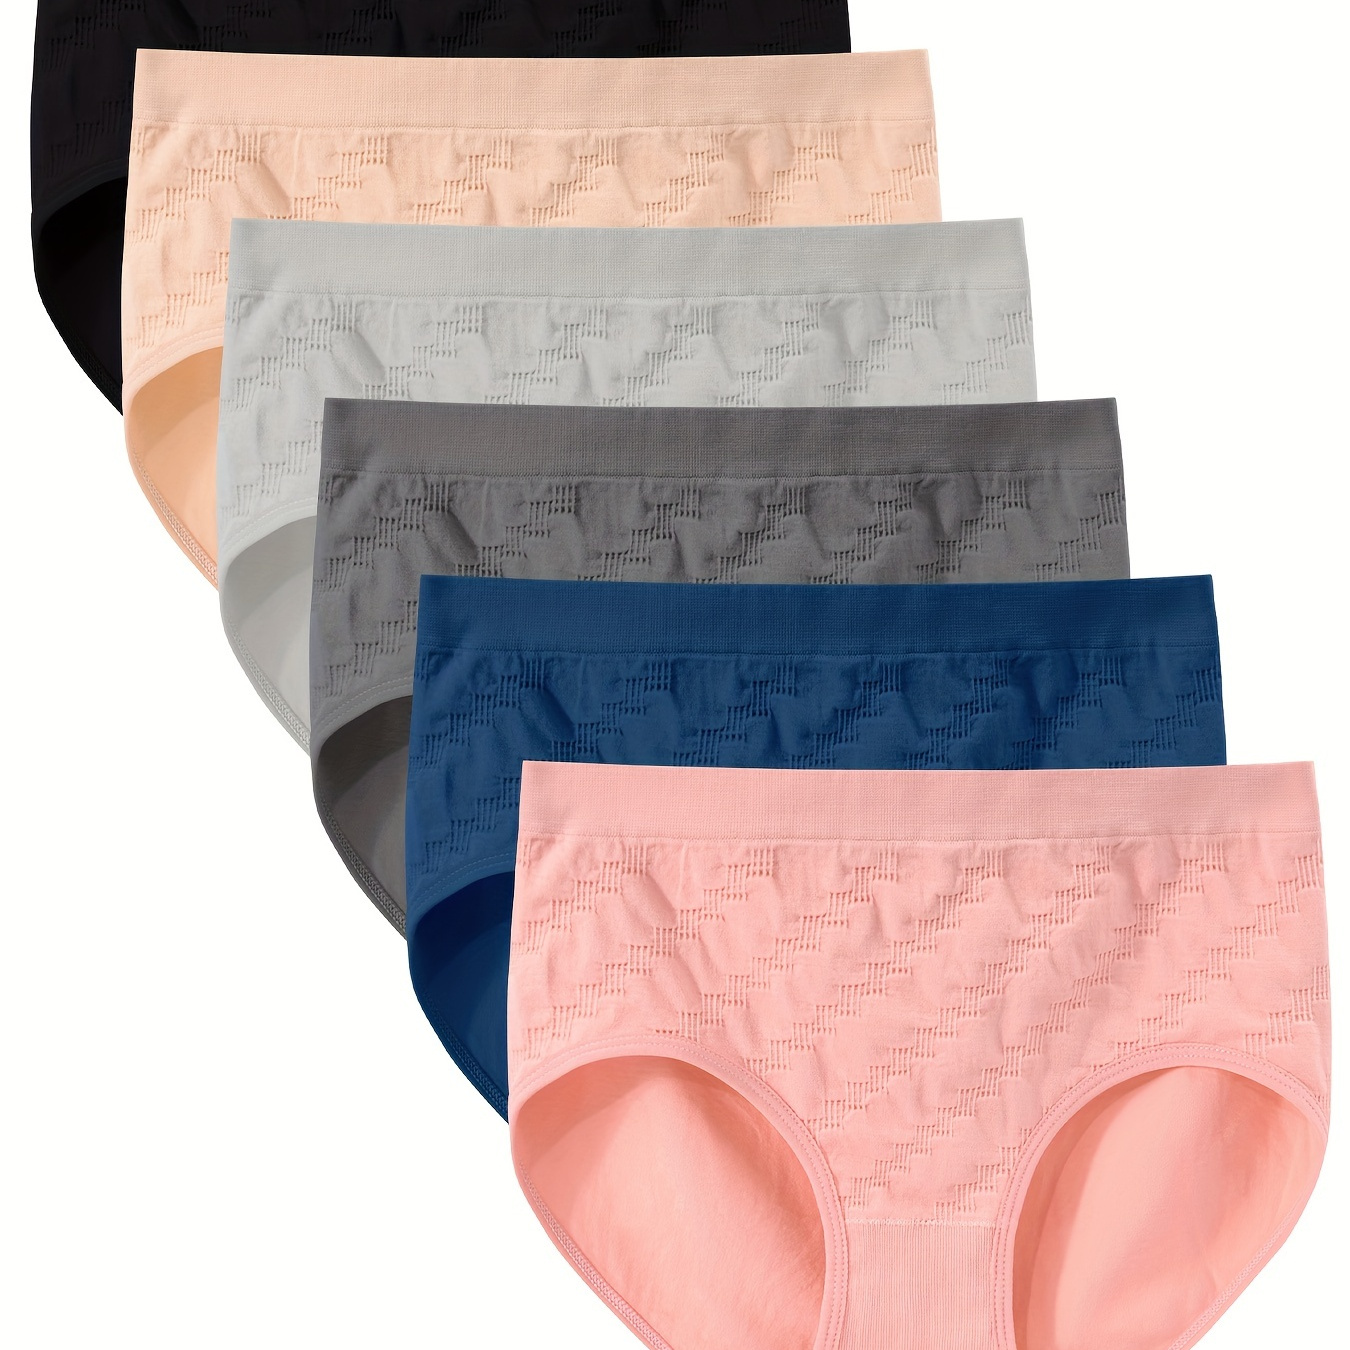 

6pcs Simple Textured Briefs, Comfy & Breathable Stretchy Intimates Panties, Women's Lingerie & Underwear